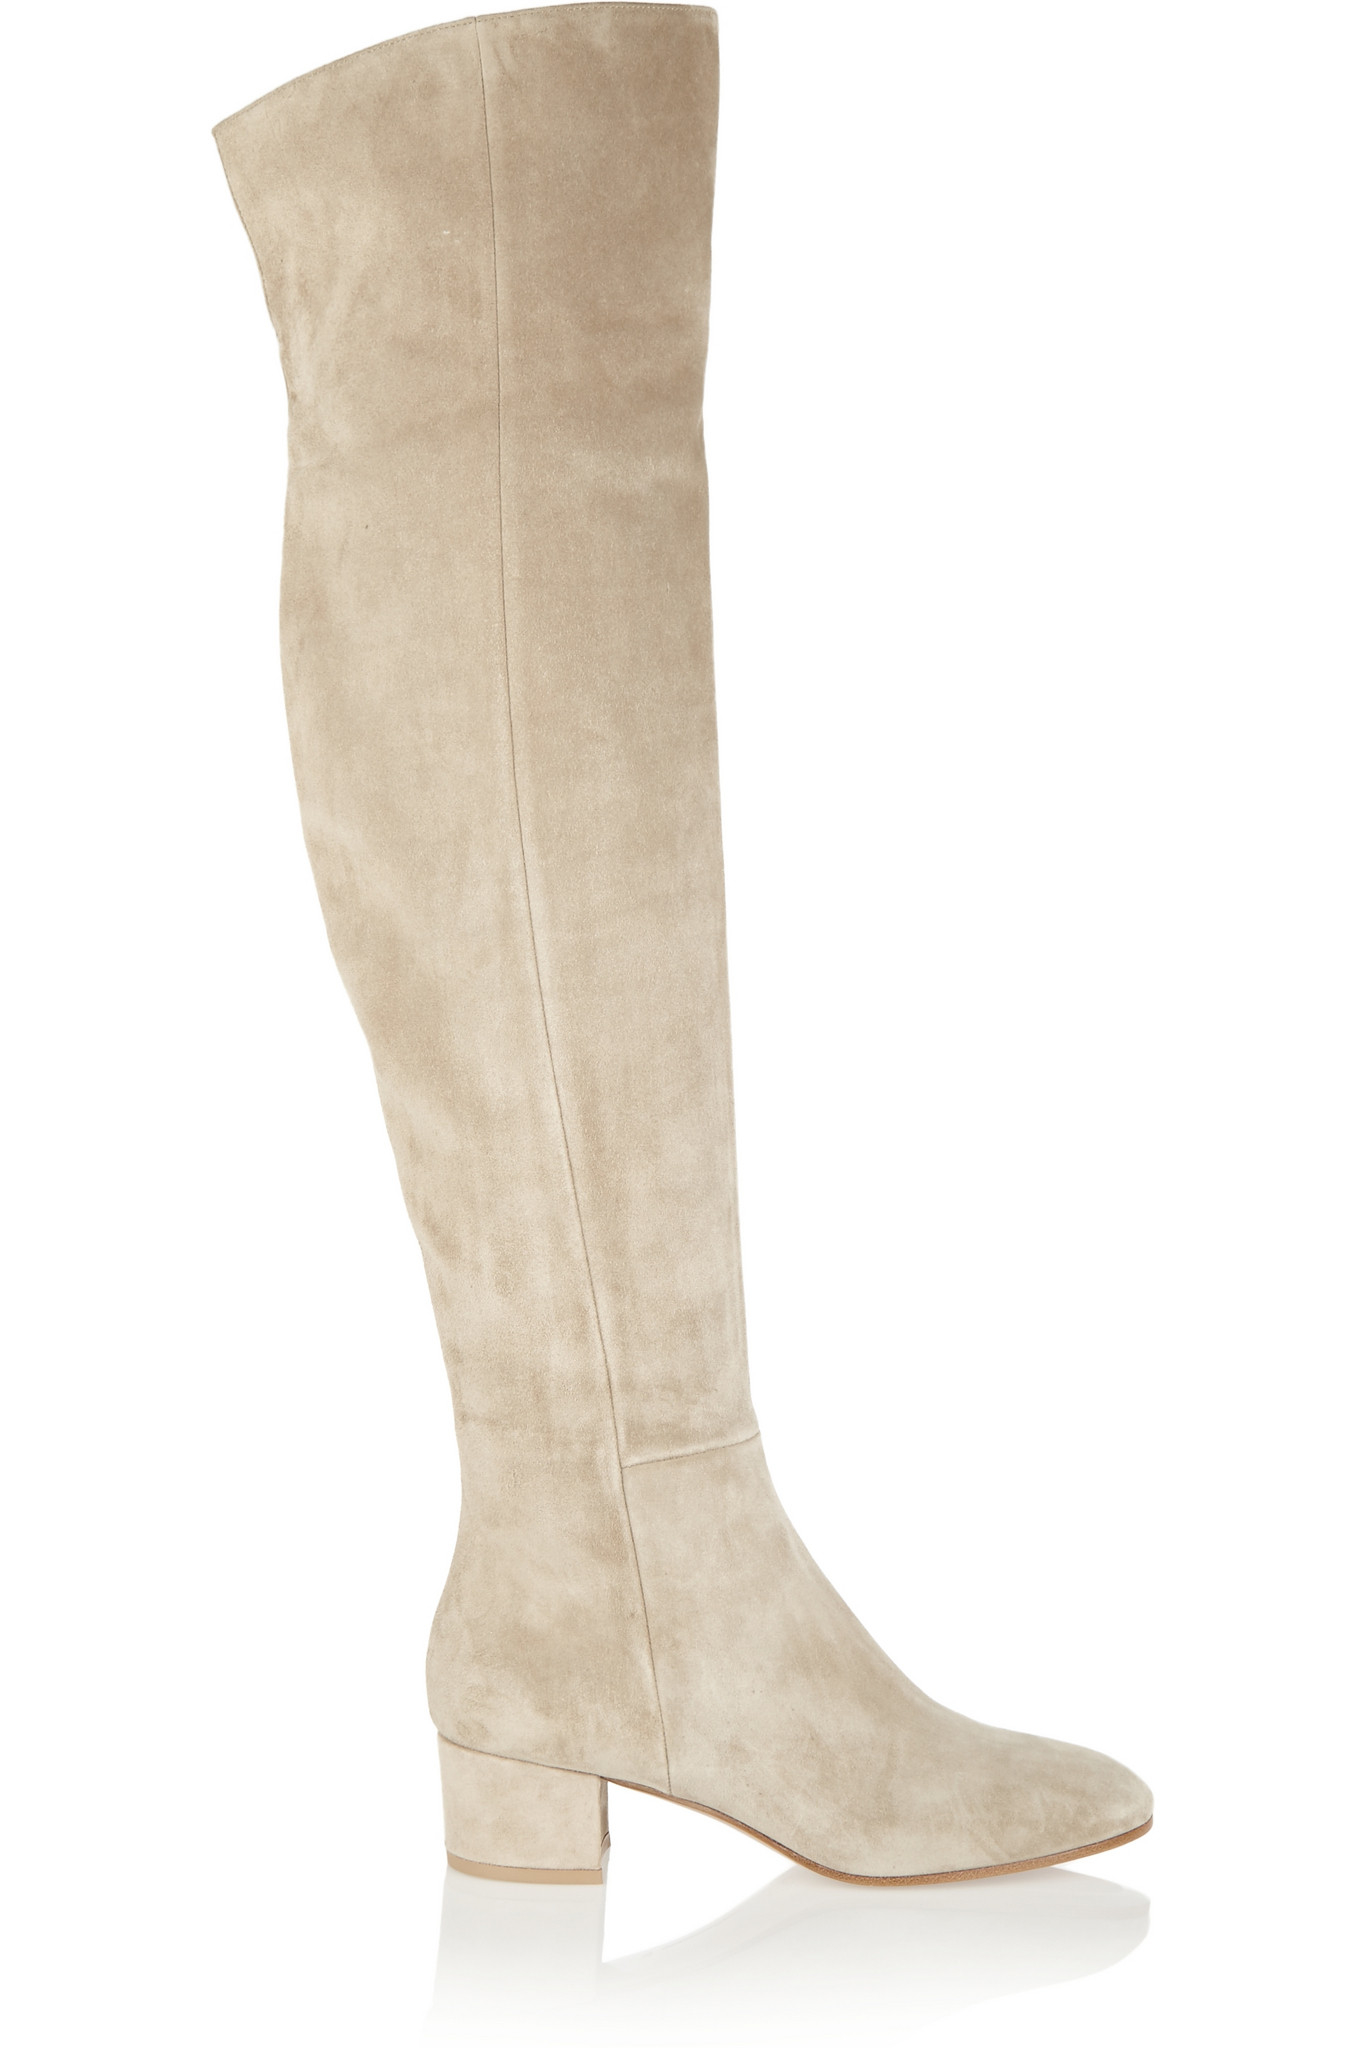 Gianvito Rossi Suede Over-the-knee Boots - Lyst